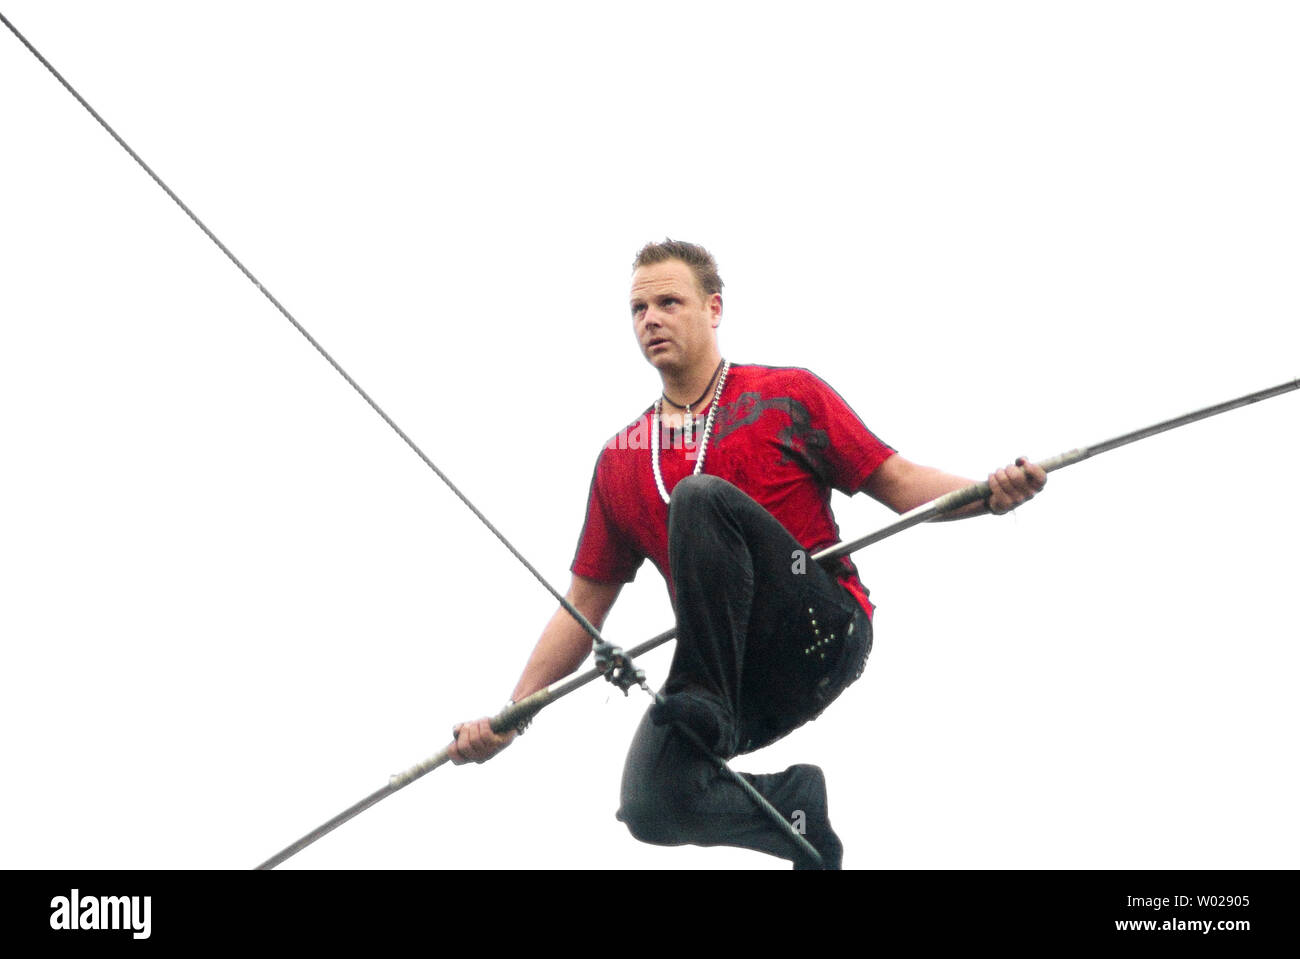 Nik Wallenda pauses to rest during his walk on a high wire that's over 1000 feet long and 200 above the  Allegheny River and Roberto Clemente Bridge without his shoes as part of the Three Rivers Regatta   in Pittsburgh on July 3,  2009. Wallenda is the seventh generation of the legendary Great Wallendas, who have performed in circus acts since the 1800s.      (UPI Photo/Archie Carpenter) Stock Photo